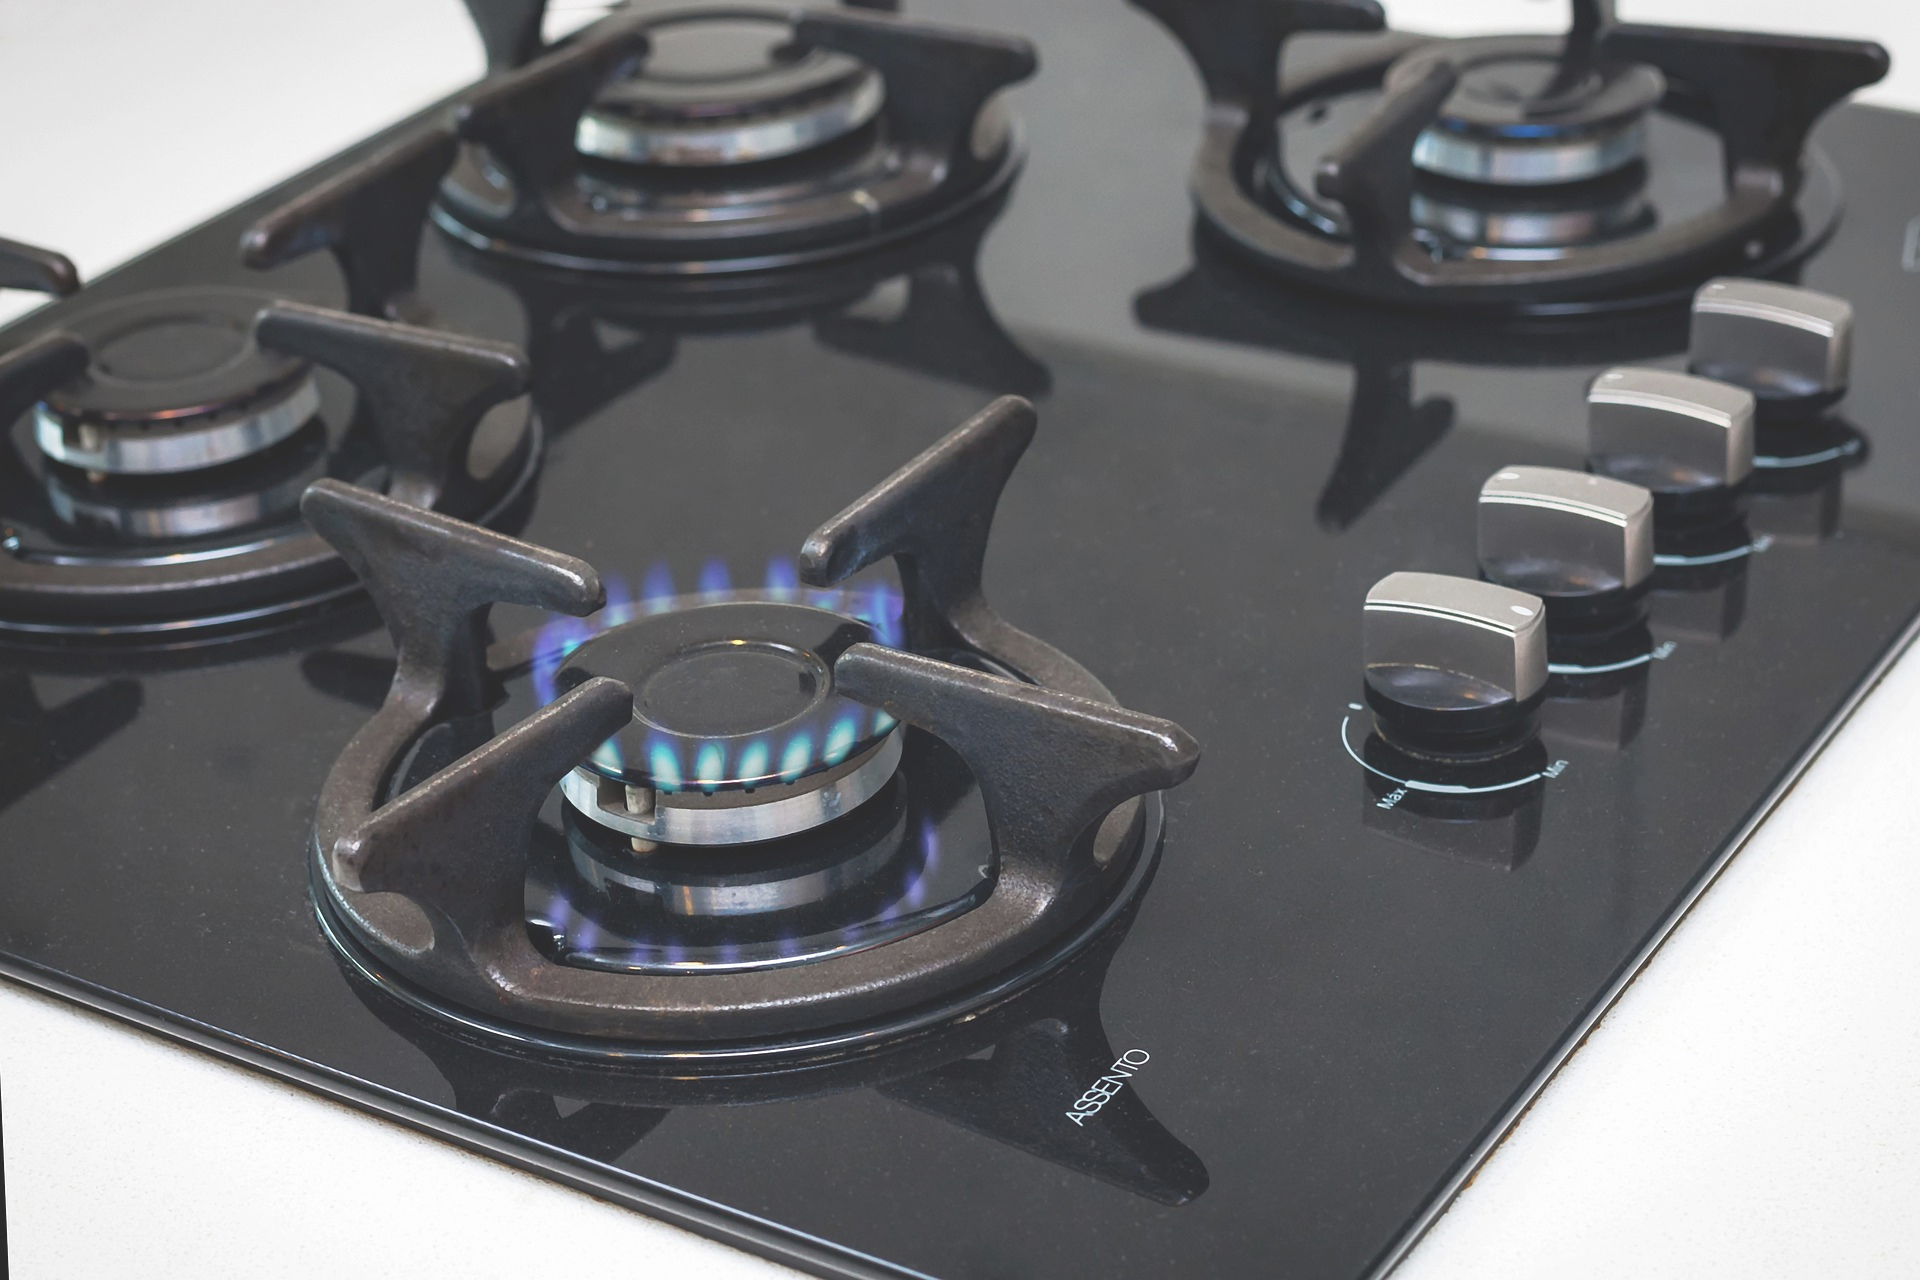 Top 4 Burner Gas Stoves in India: Buying Guide